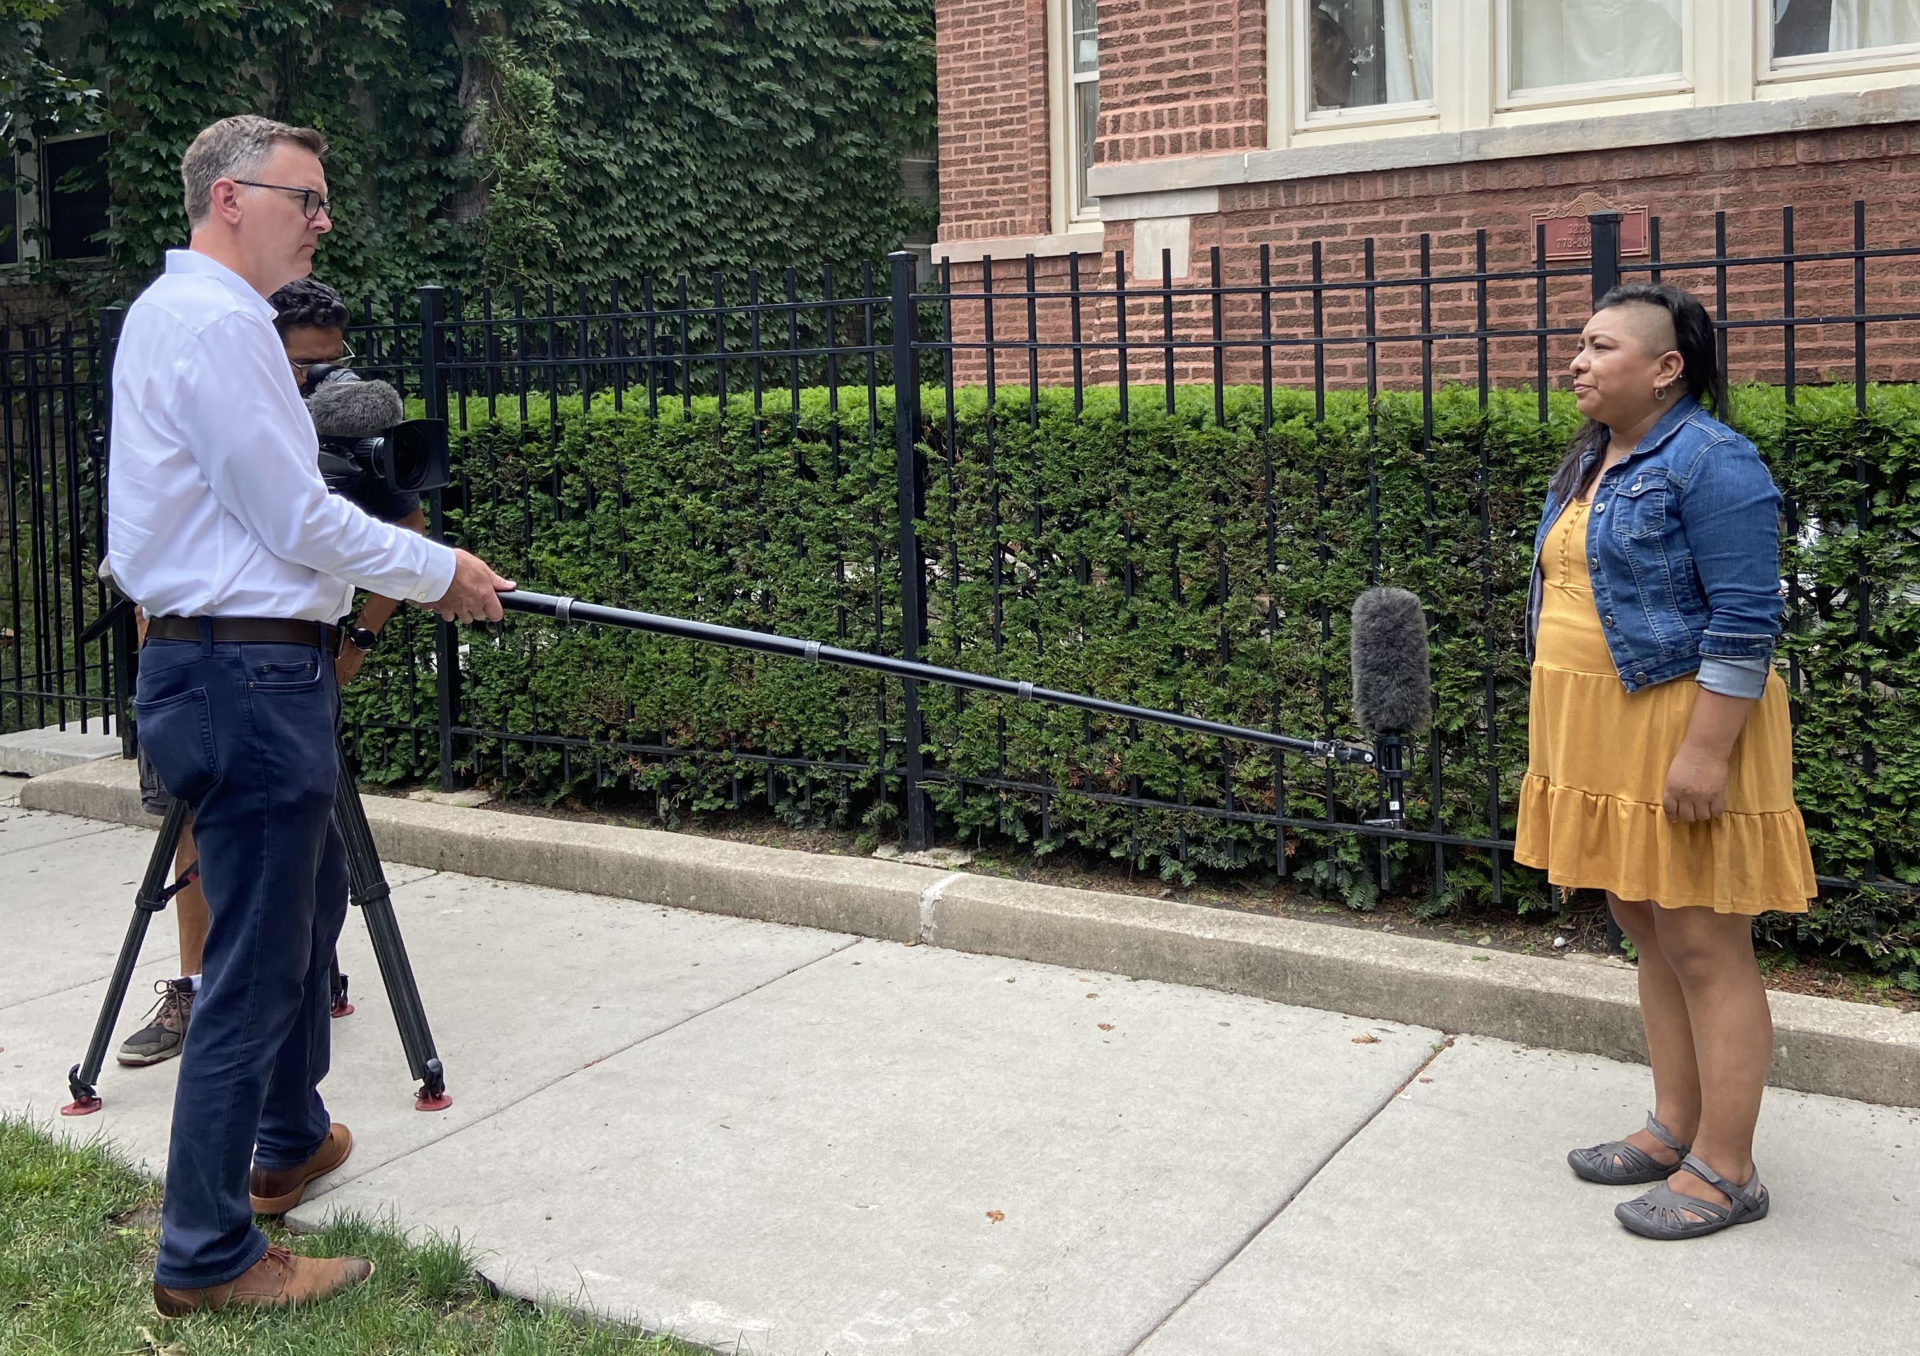 A parent leader is interviewed by a television reporter in front of her home